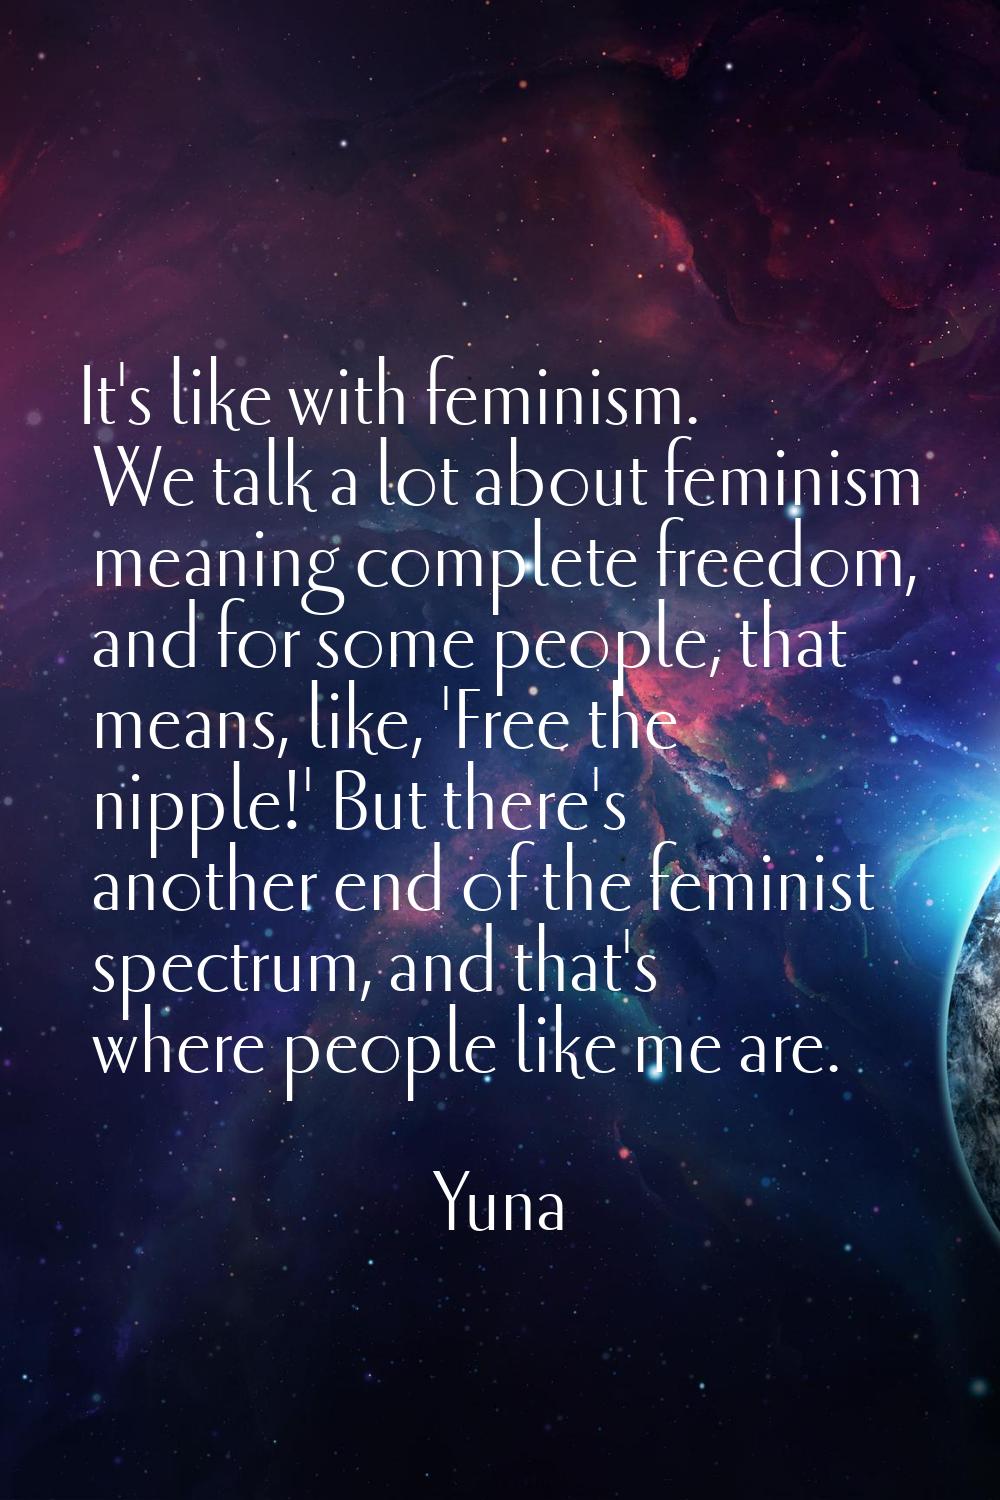 It's like with feminism. We talk a lot about feminism meaning complete freedom, and for some people